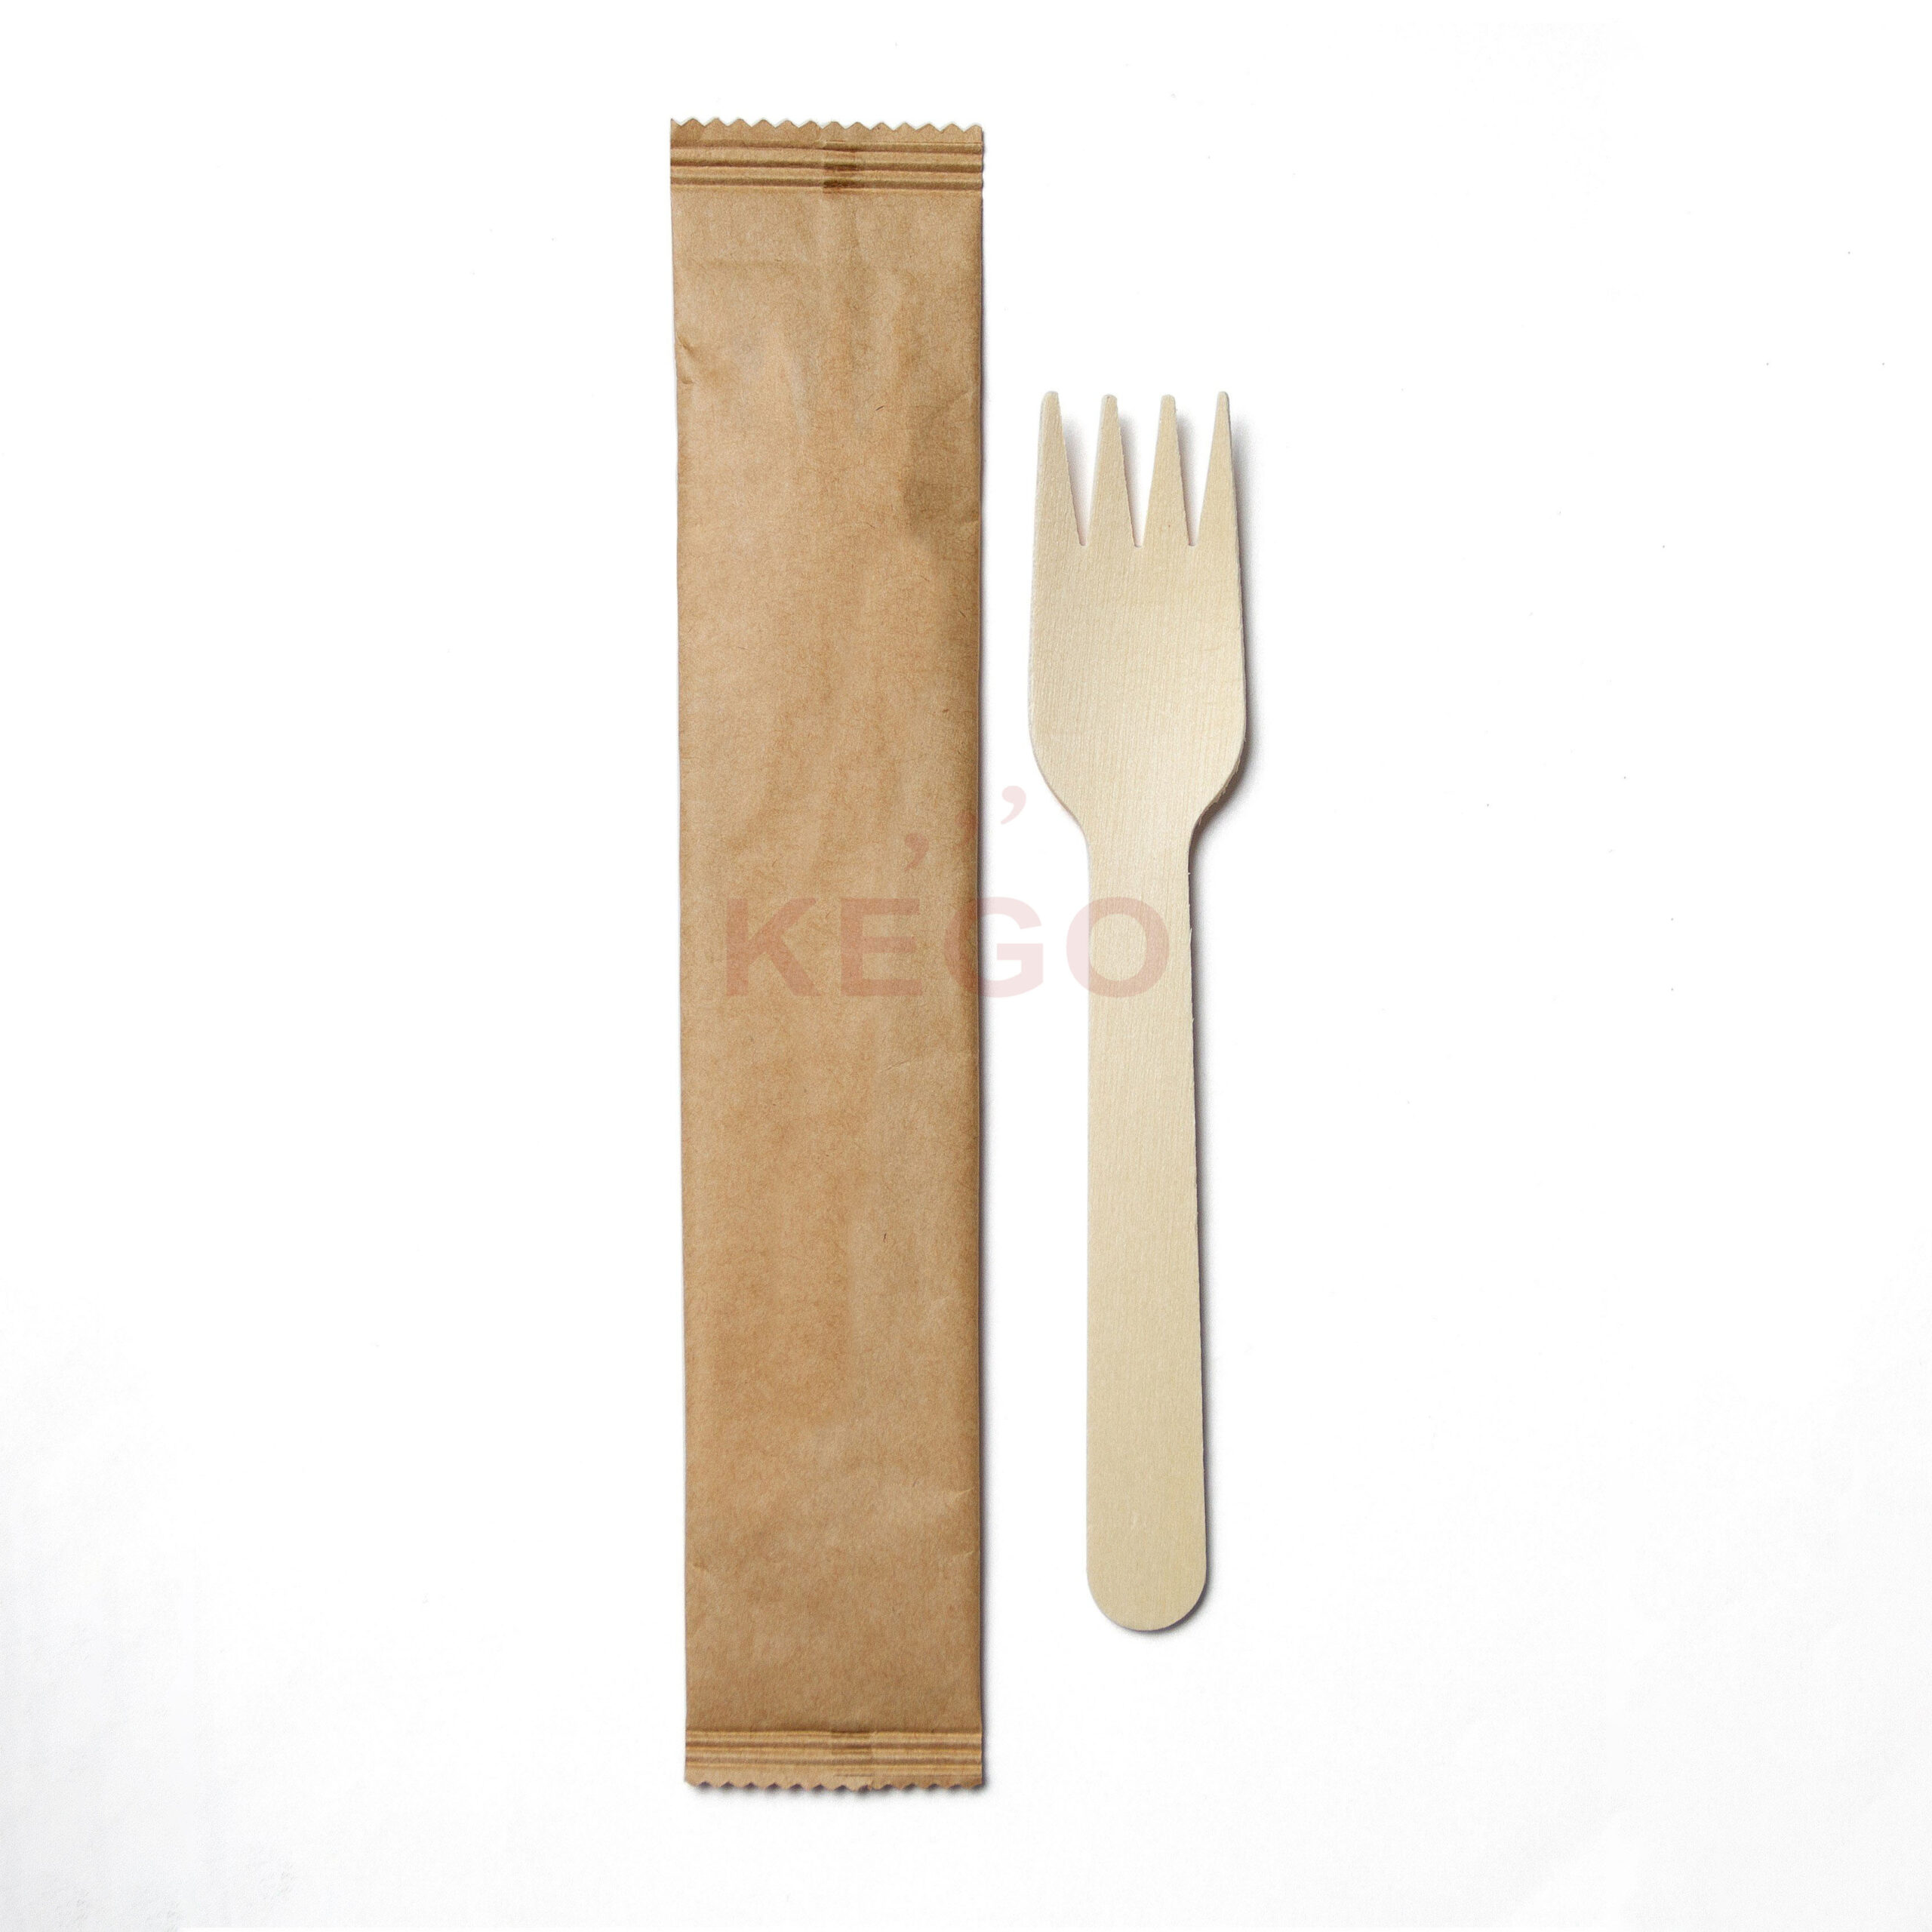 https://disposablewoodencutlery.com/wp-content/uploads/2015/09/Individual-Set-2-scaled.jpg